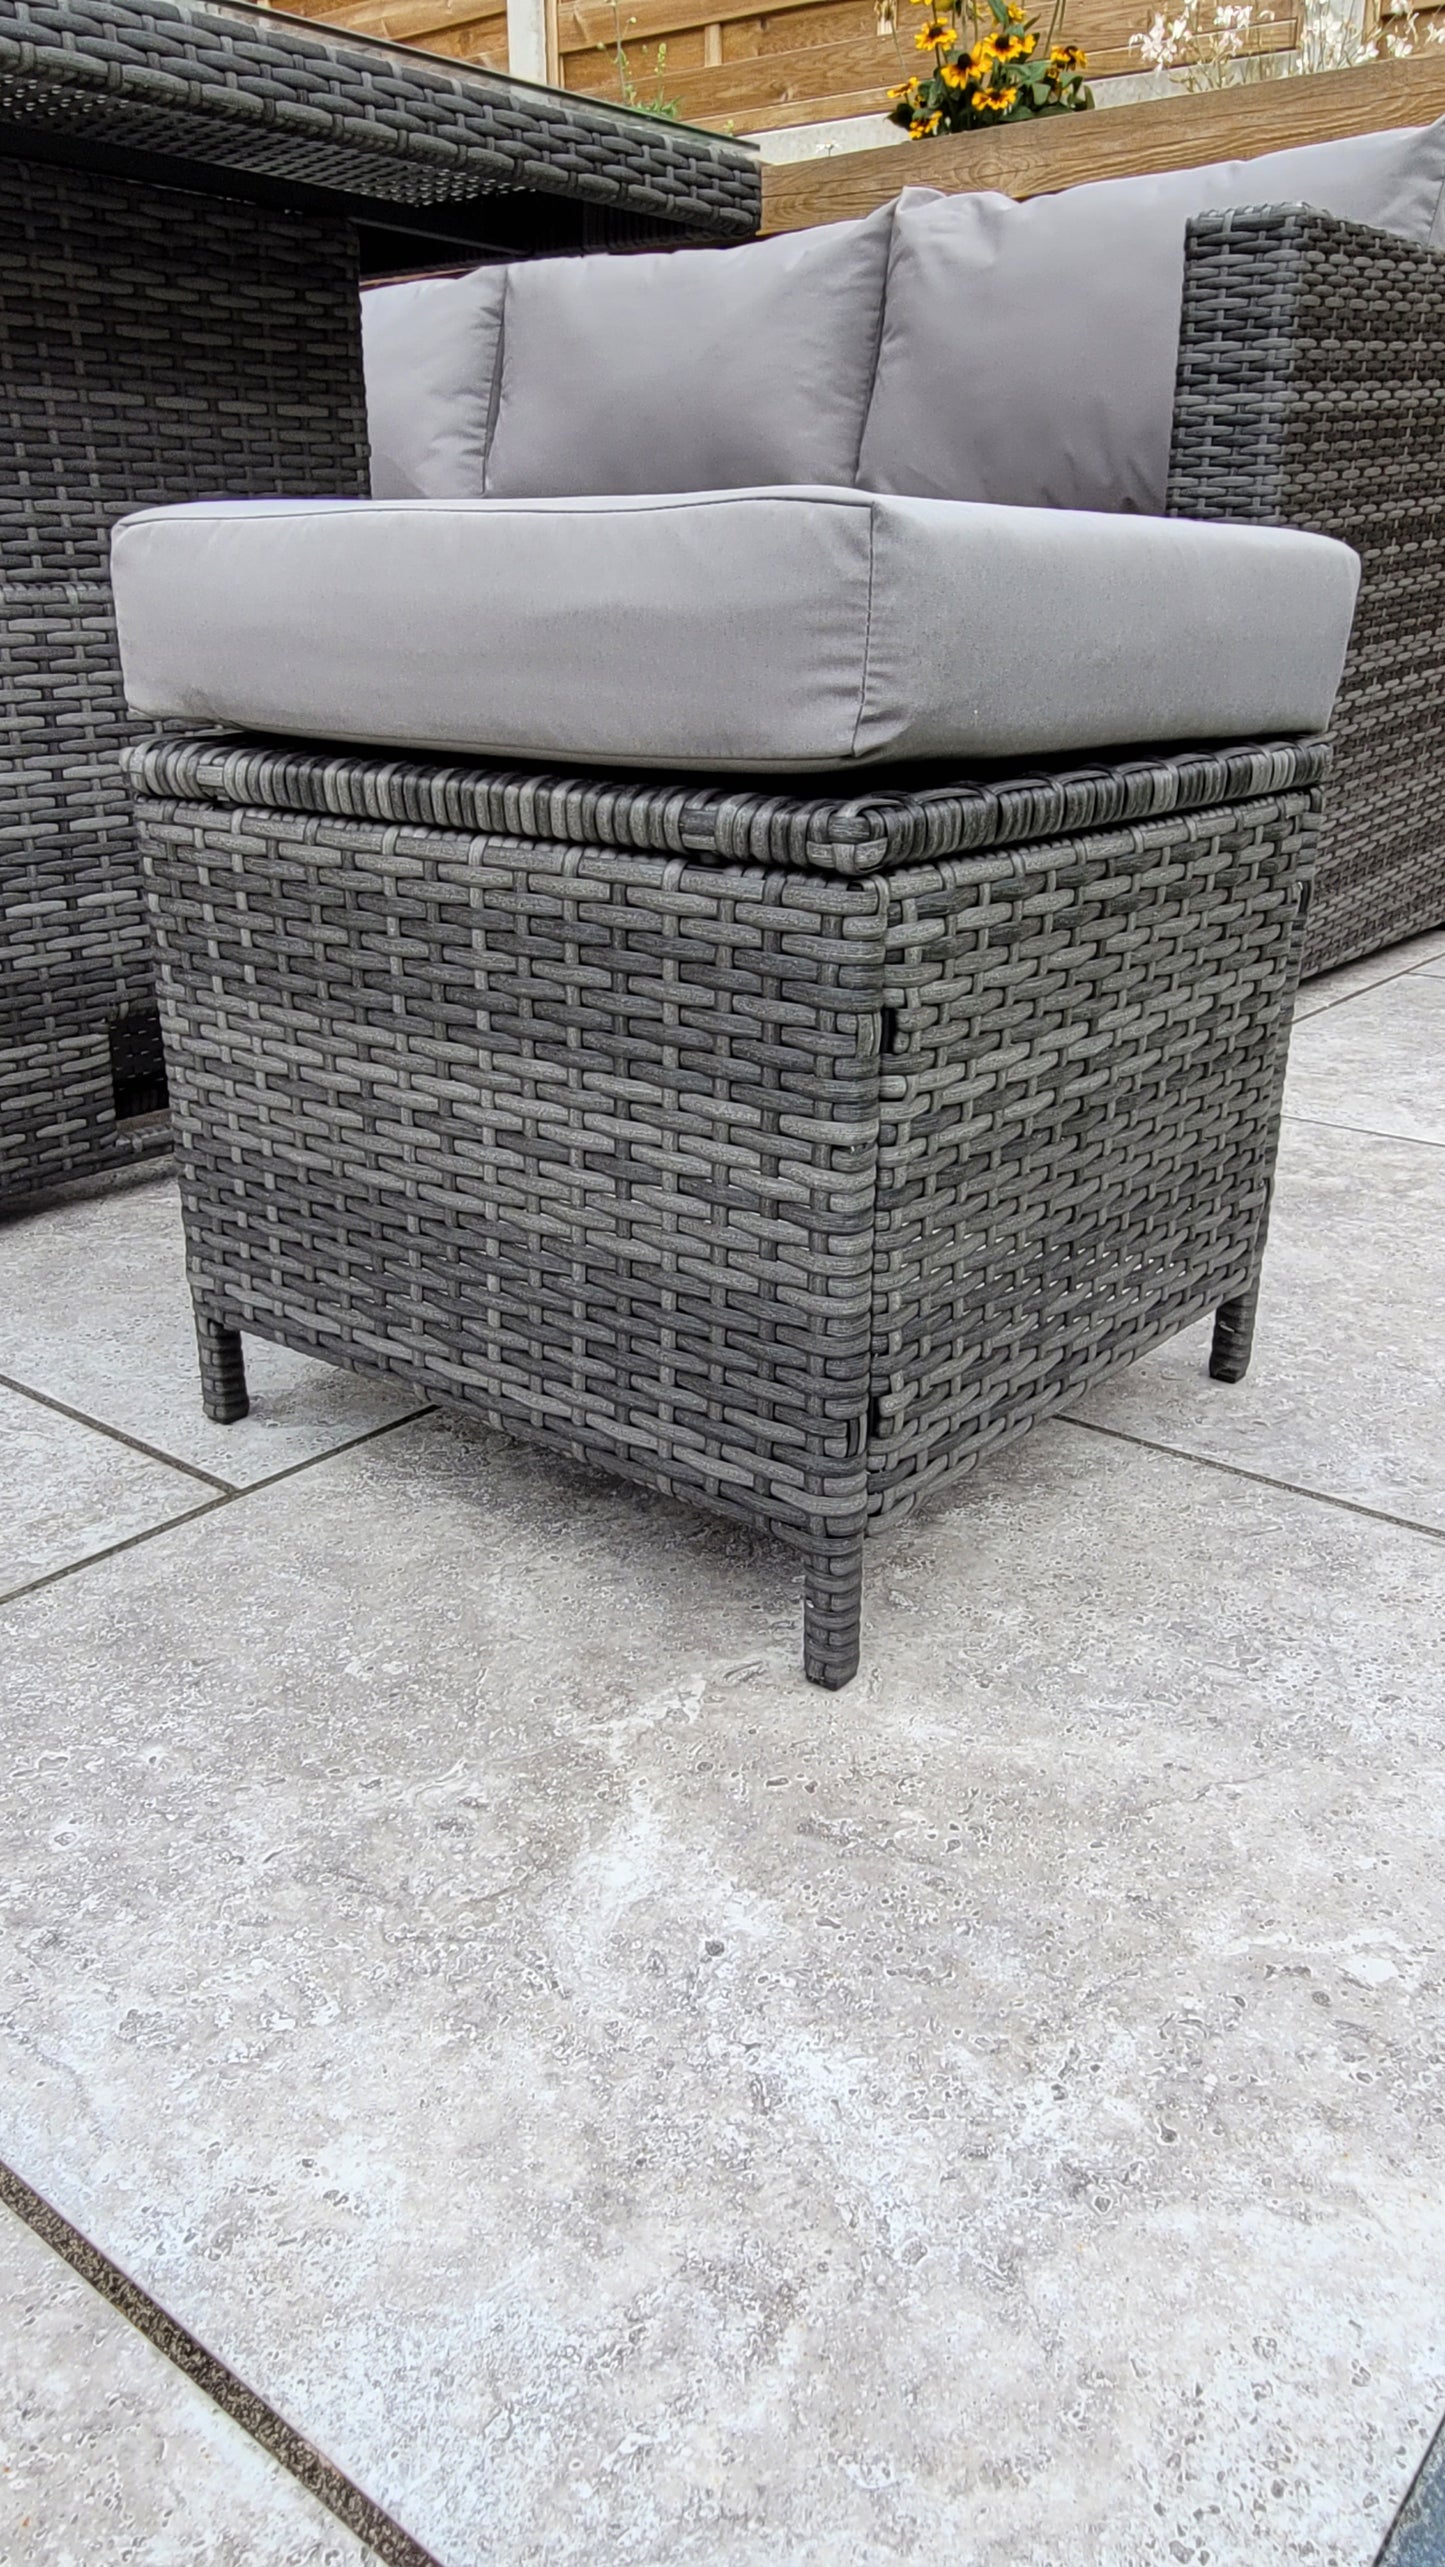 Signature Weave - Catalina corner dining sofa with lift table & ice bucket - Beyond outdoor living